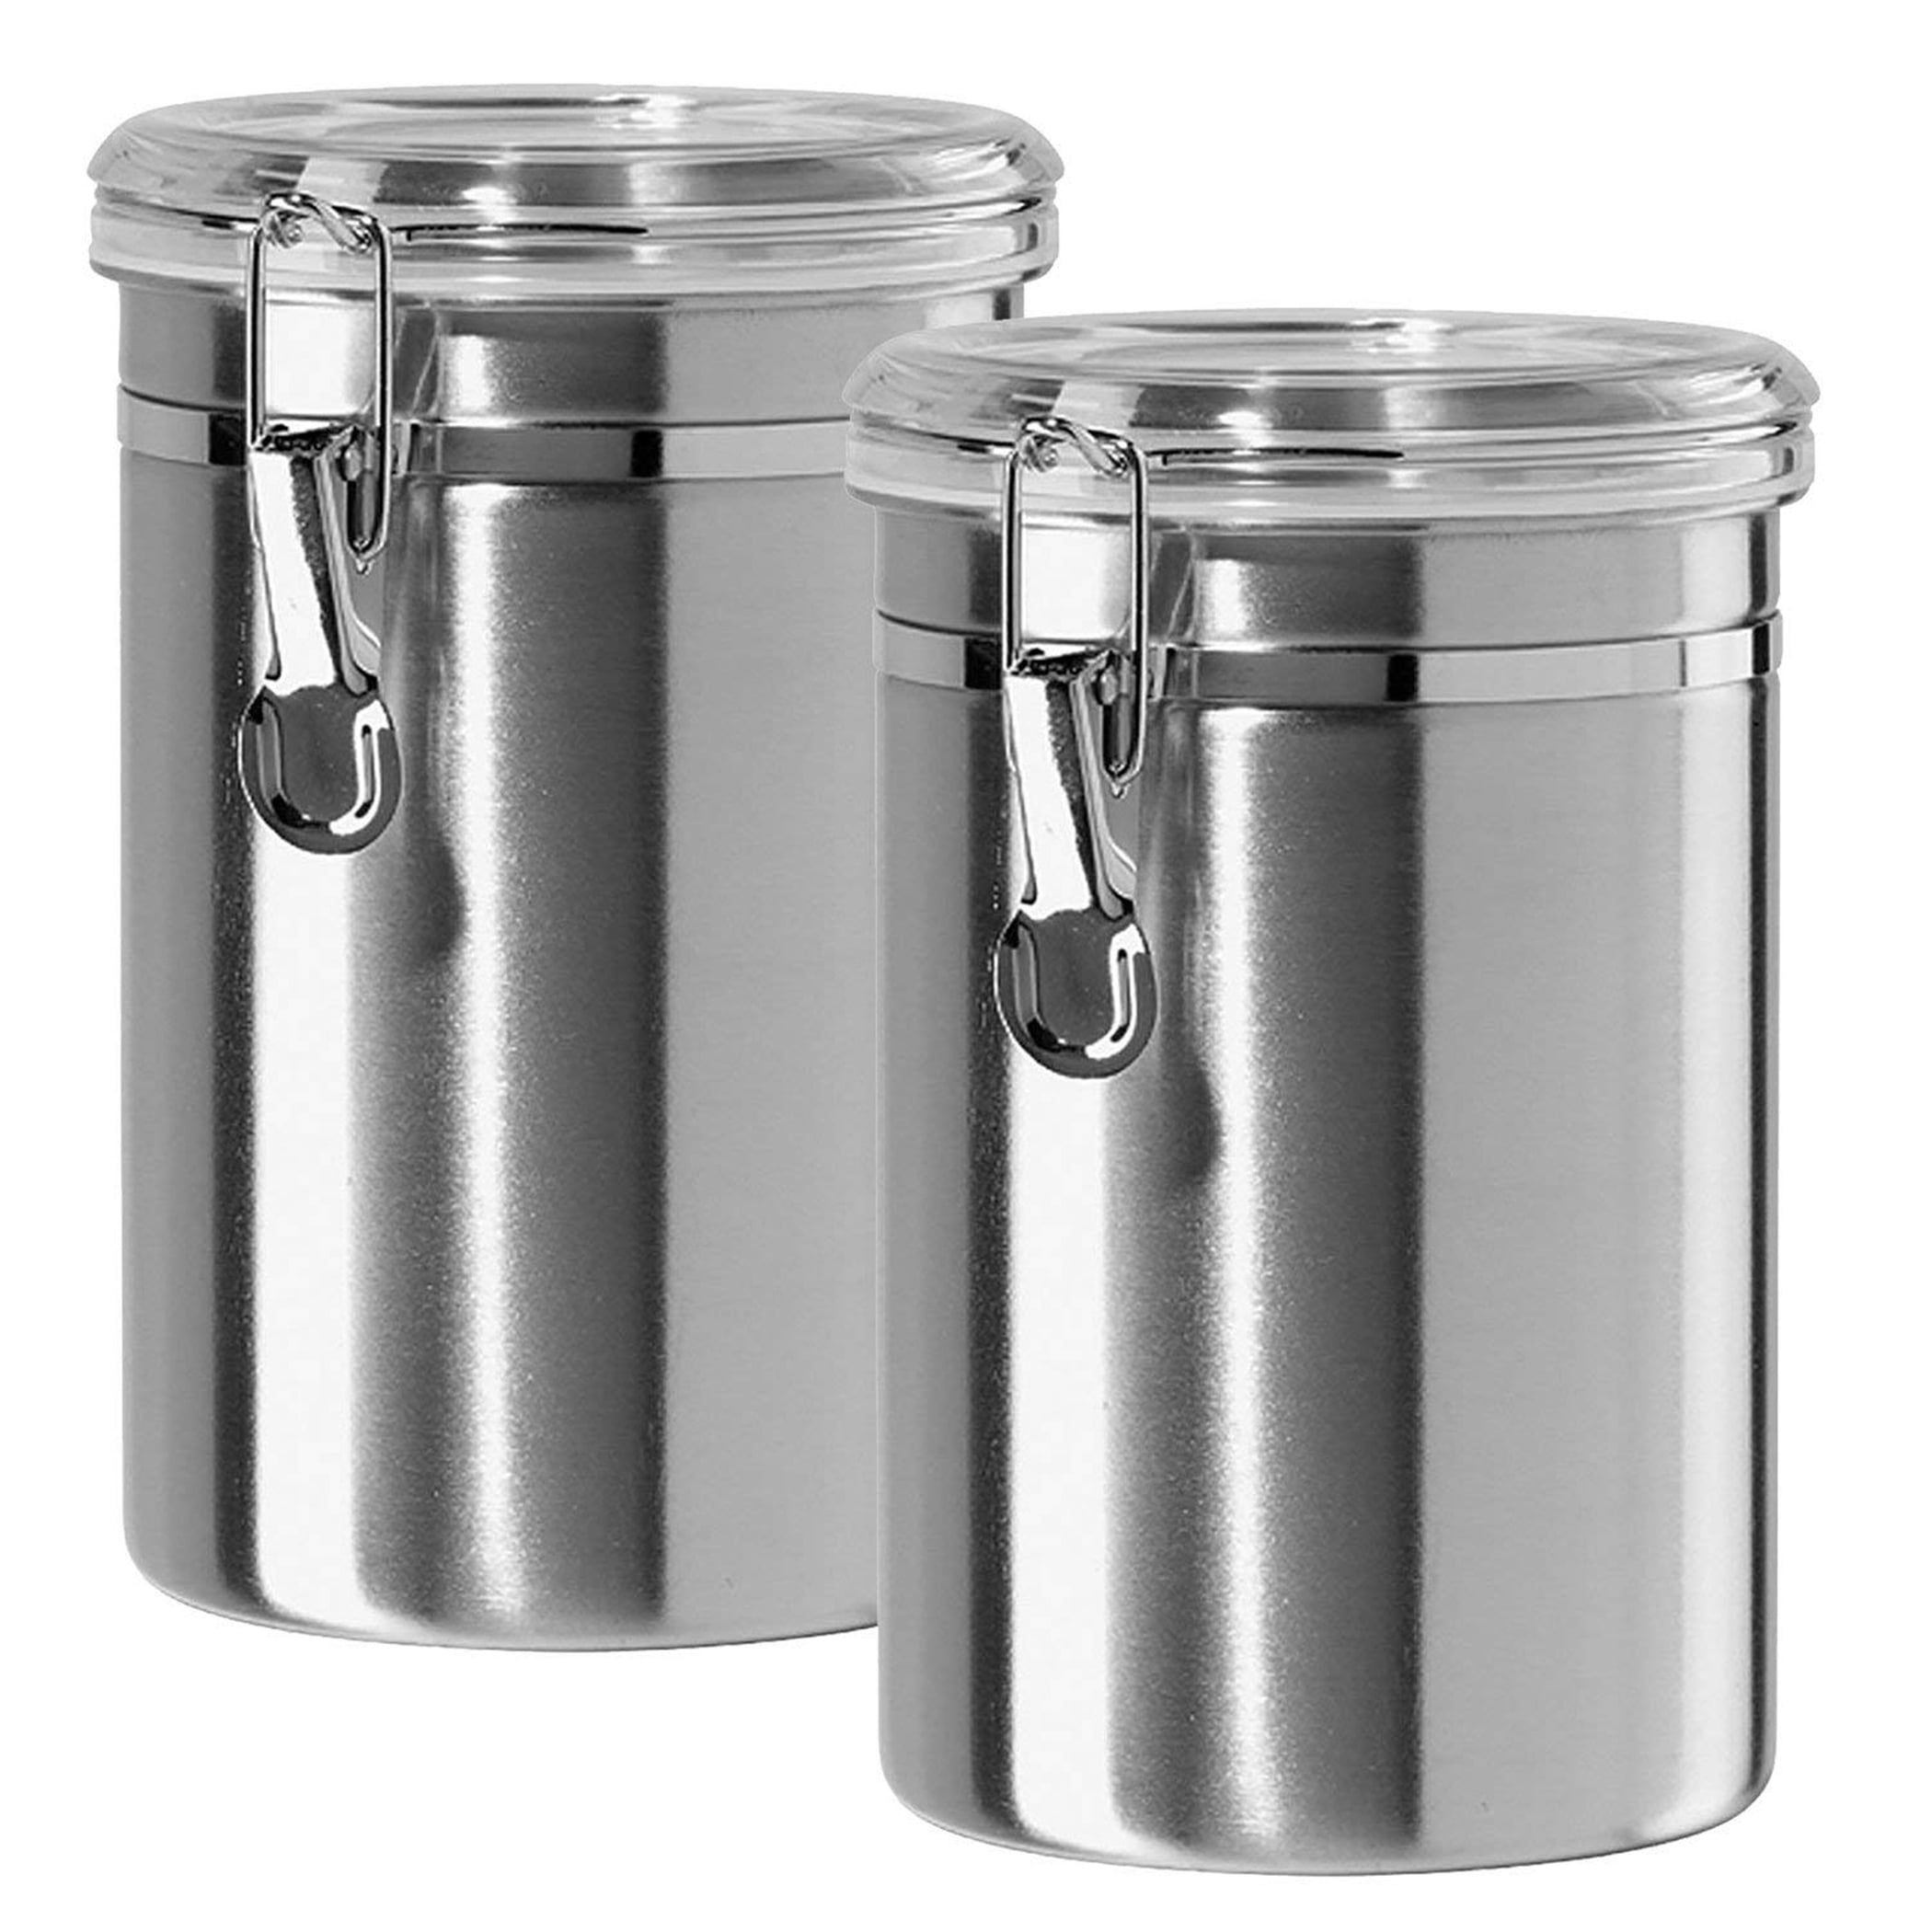 Canister Set Stainless Steel Beautiful Canisters For Kitchen Medium 64 Fluid Oz With